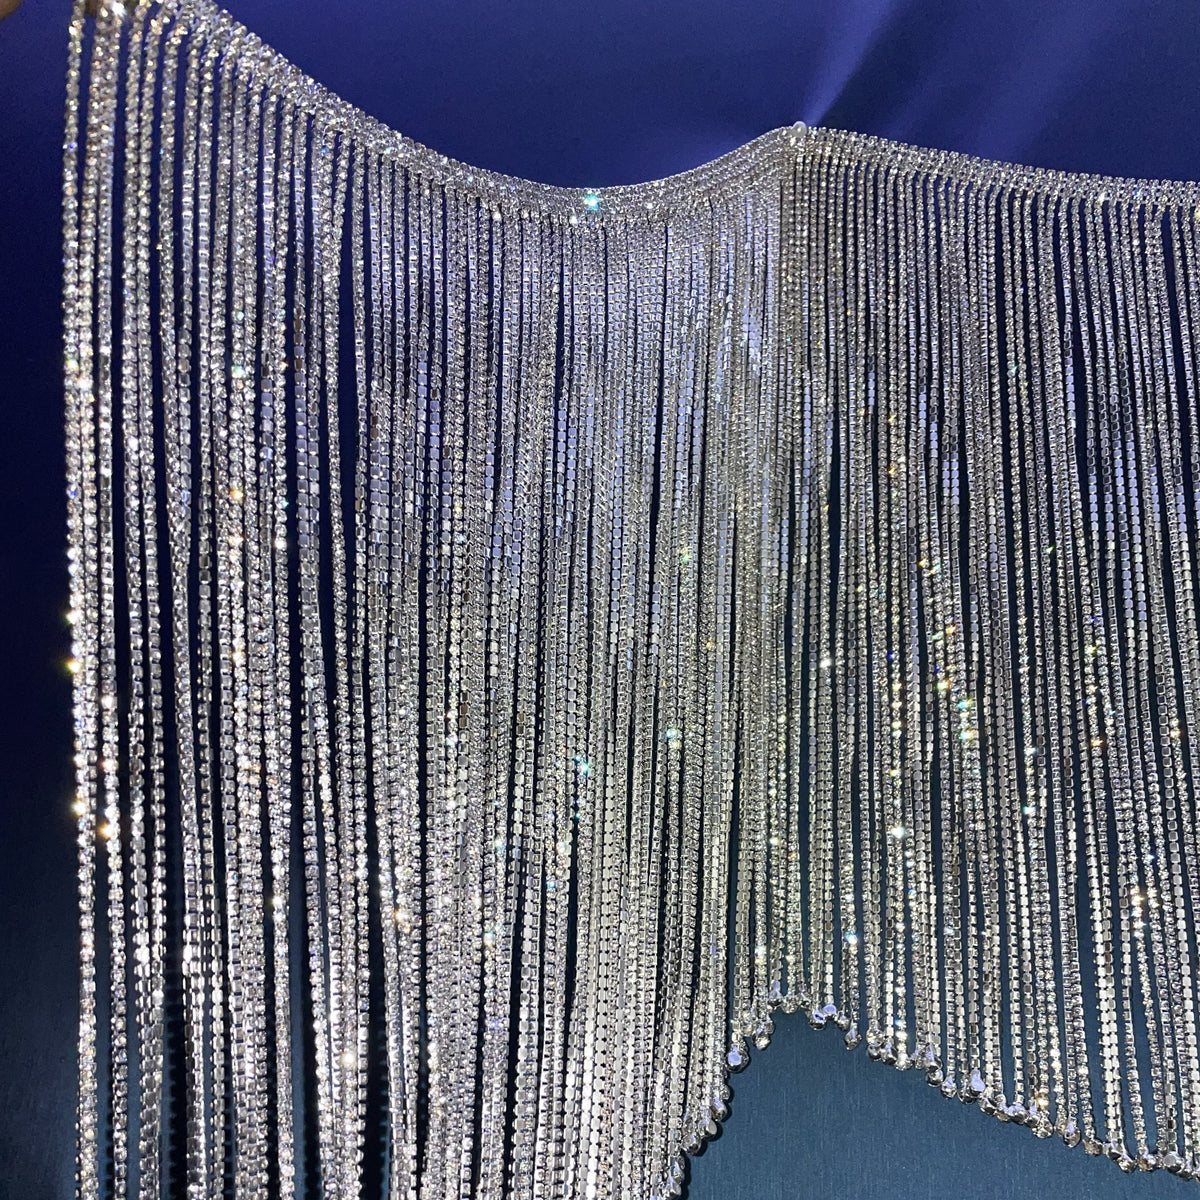 Perial Co Gold Rhinestone Fringe Trim Sold by the Yard 18 inches Wide